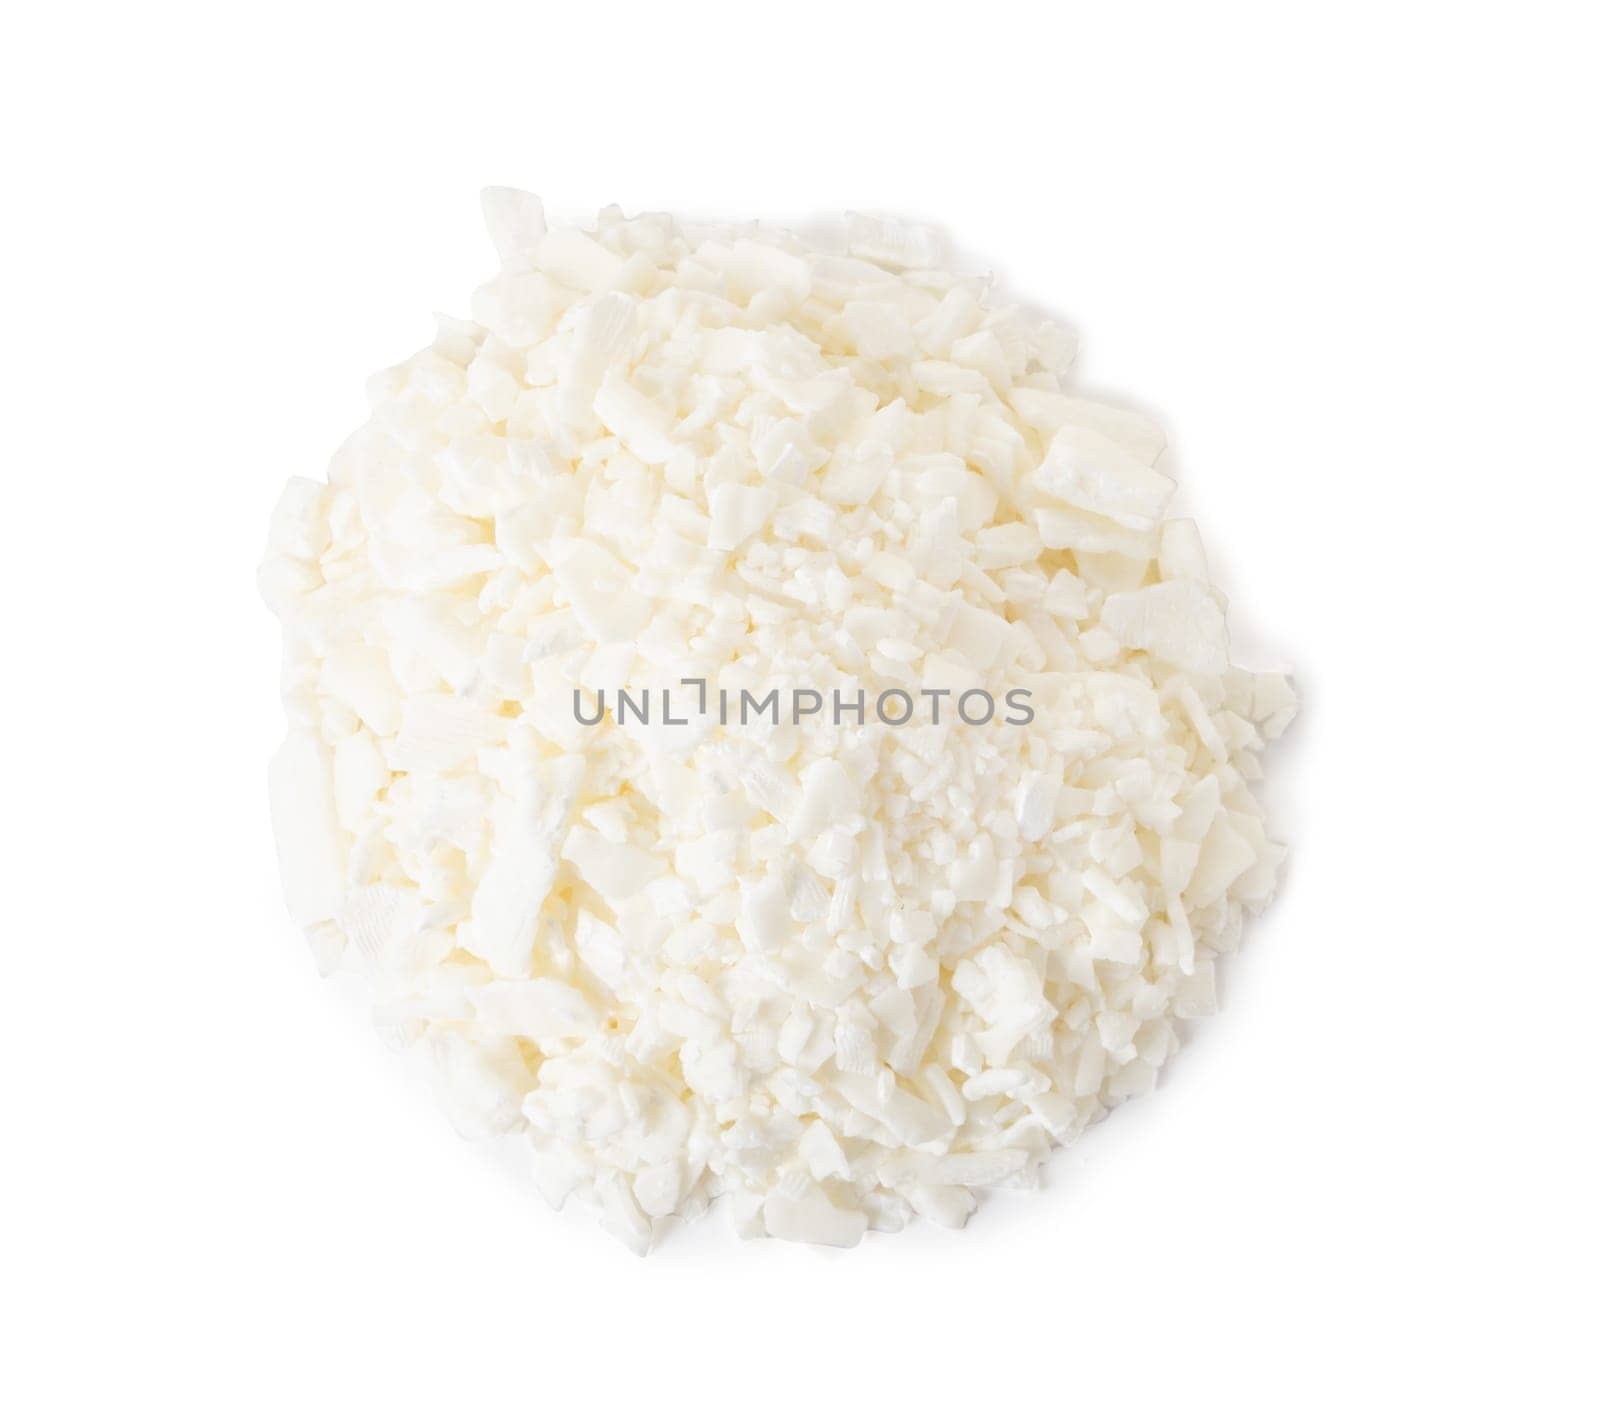 Organic white soy wax flakes for candles in isolated on white background by Desperada